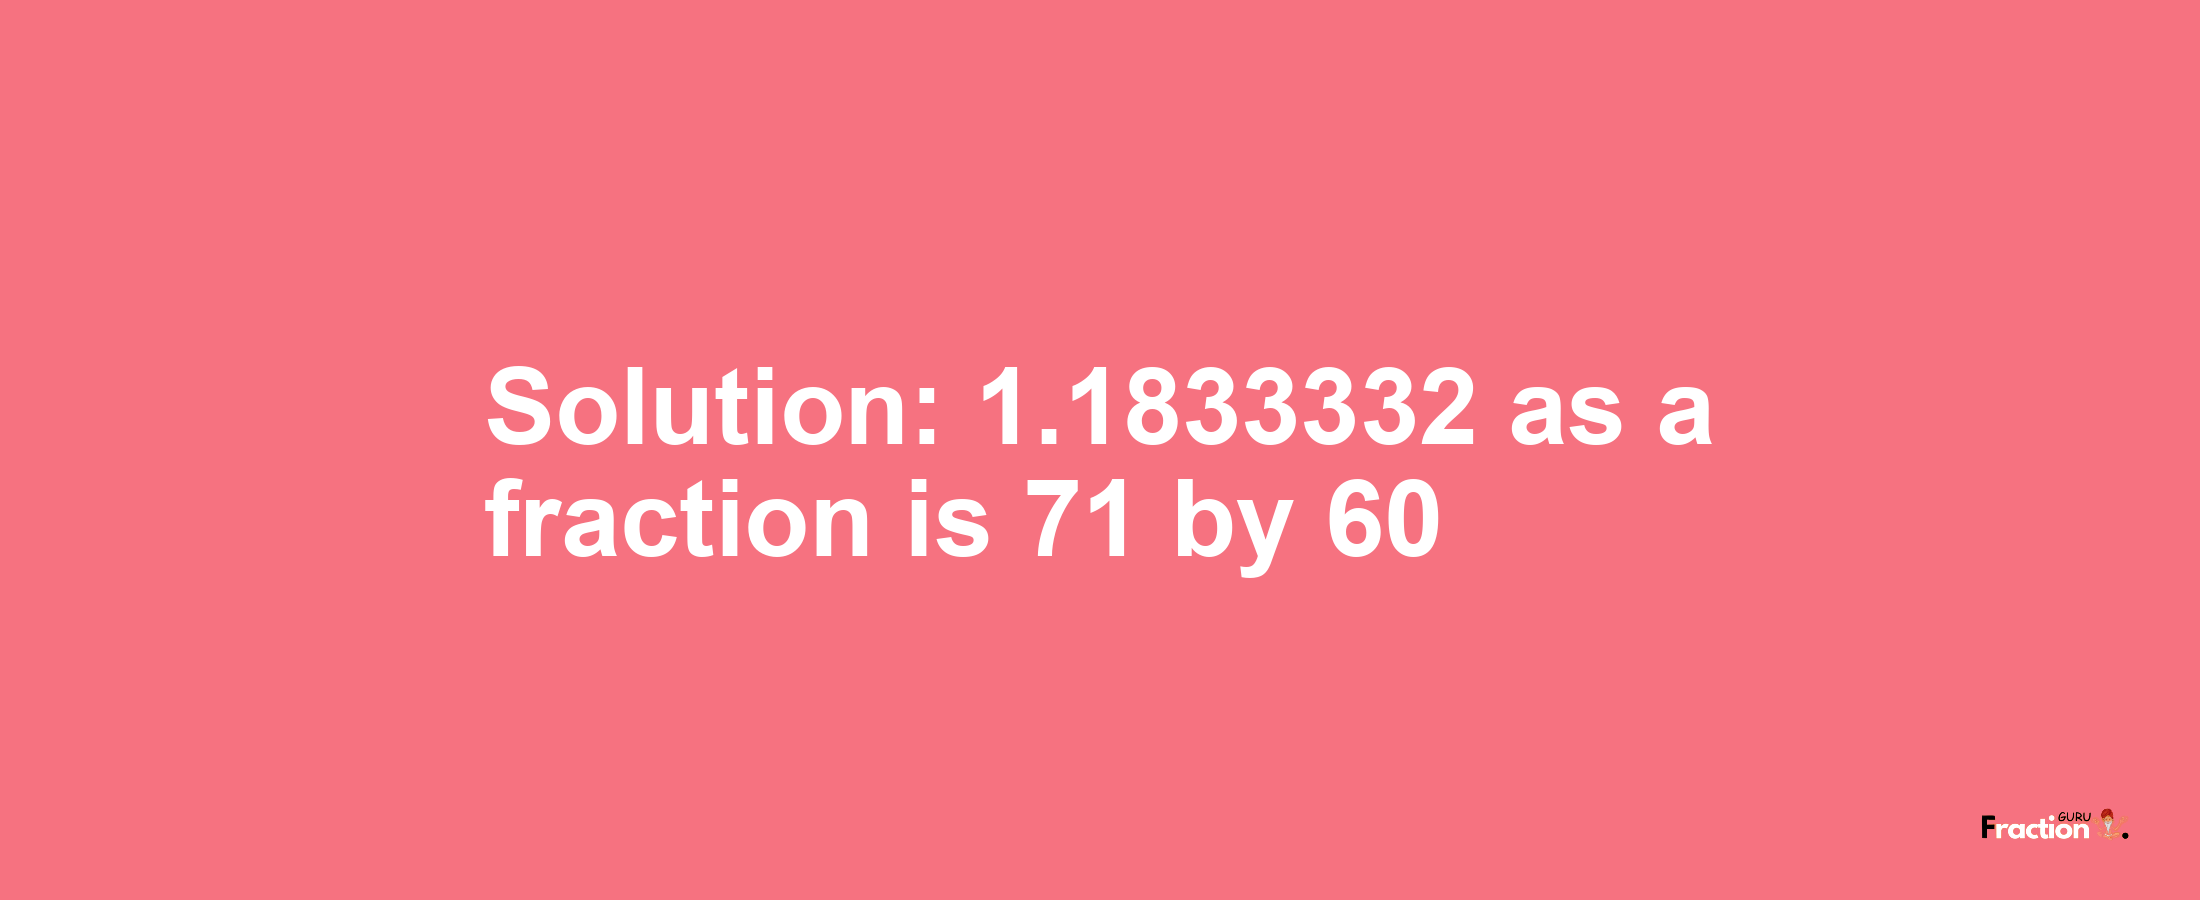 Solution:1.1833332 as a fraction is 71/60